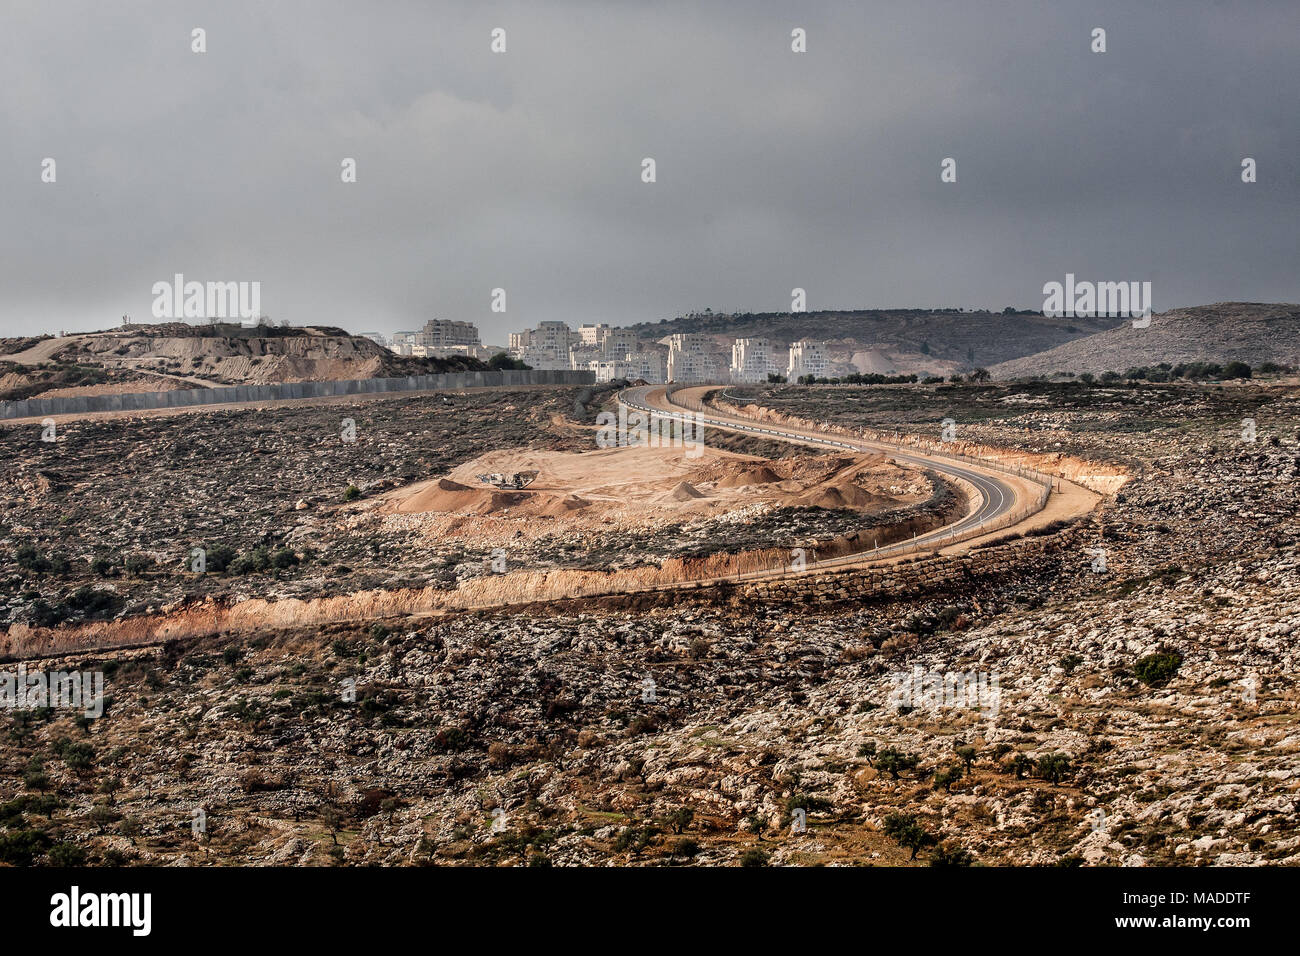 Bilin, Palestine, December 31, 2010: Jewish settlement surrounded by military area built illegally near Palestinian village of Bilin, West Bank. Stock Photo